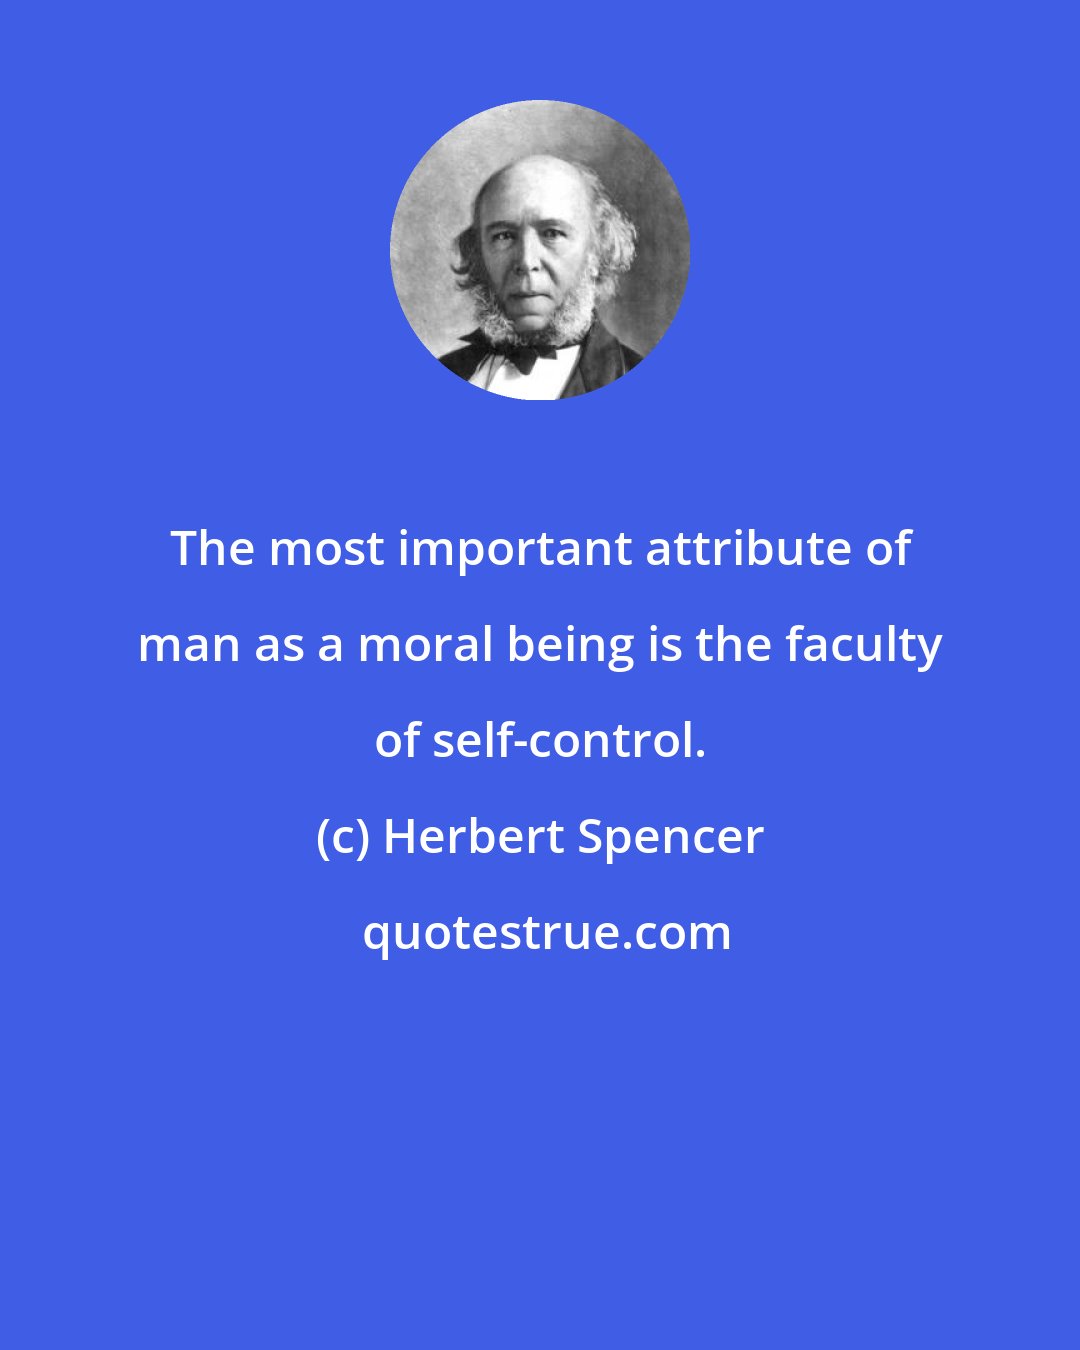 Herbert Spencer: The most important attribute of man as a moral being is the faculty of self-control.